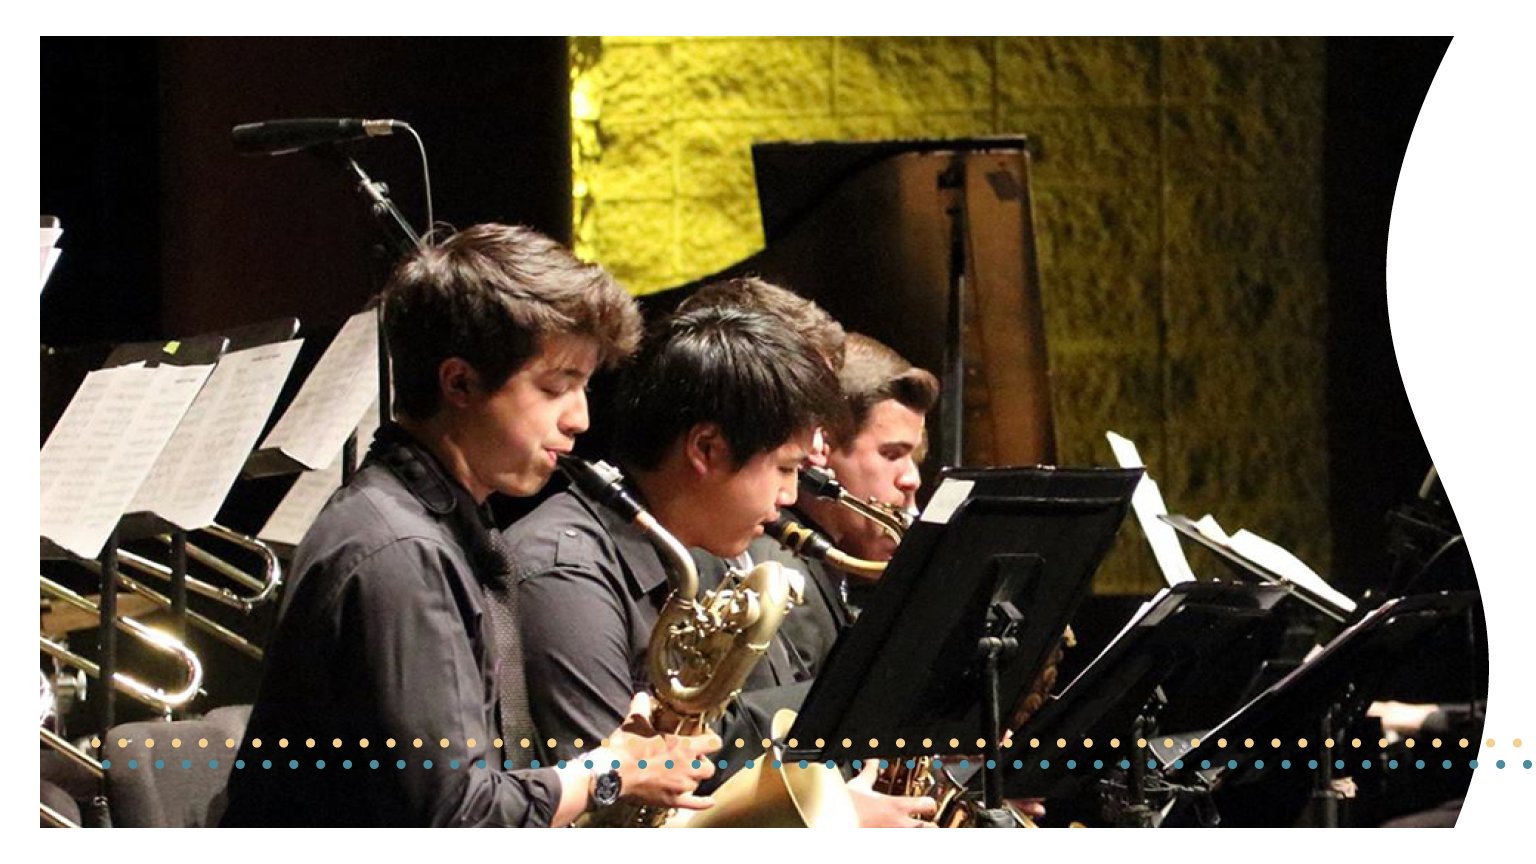 A group of students play saxaphones at a performance.